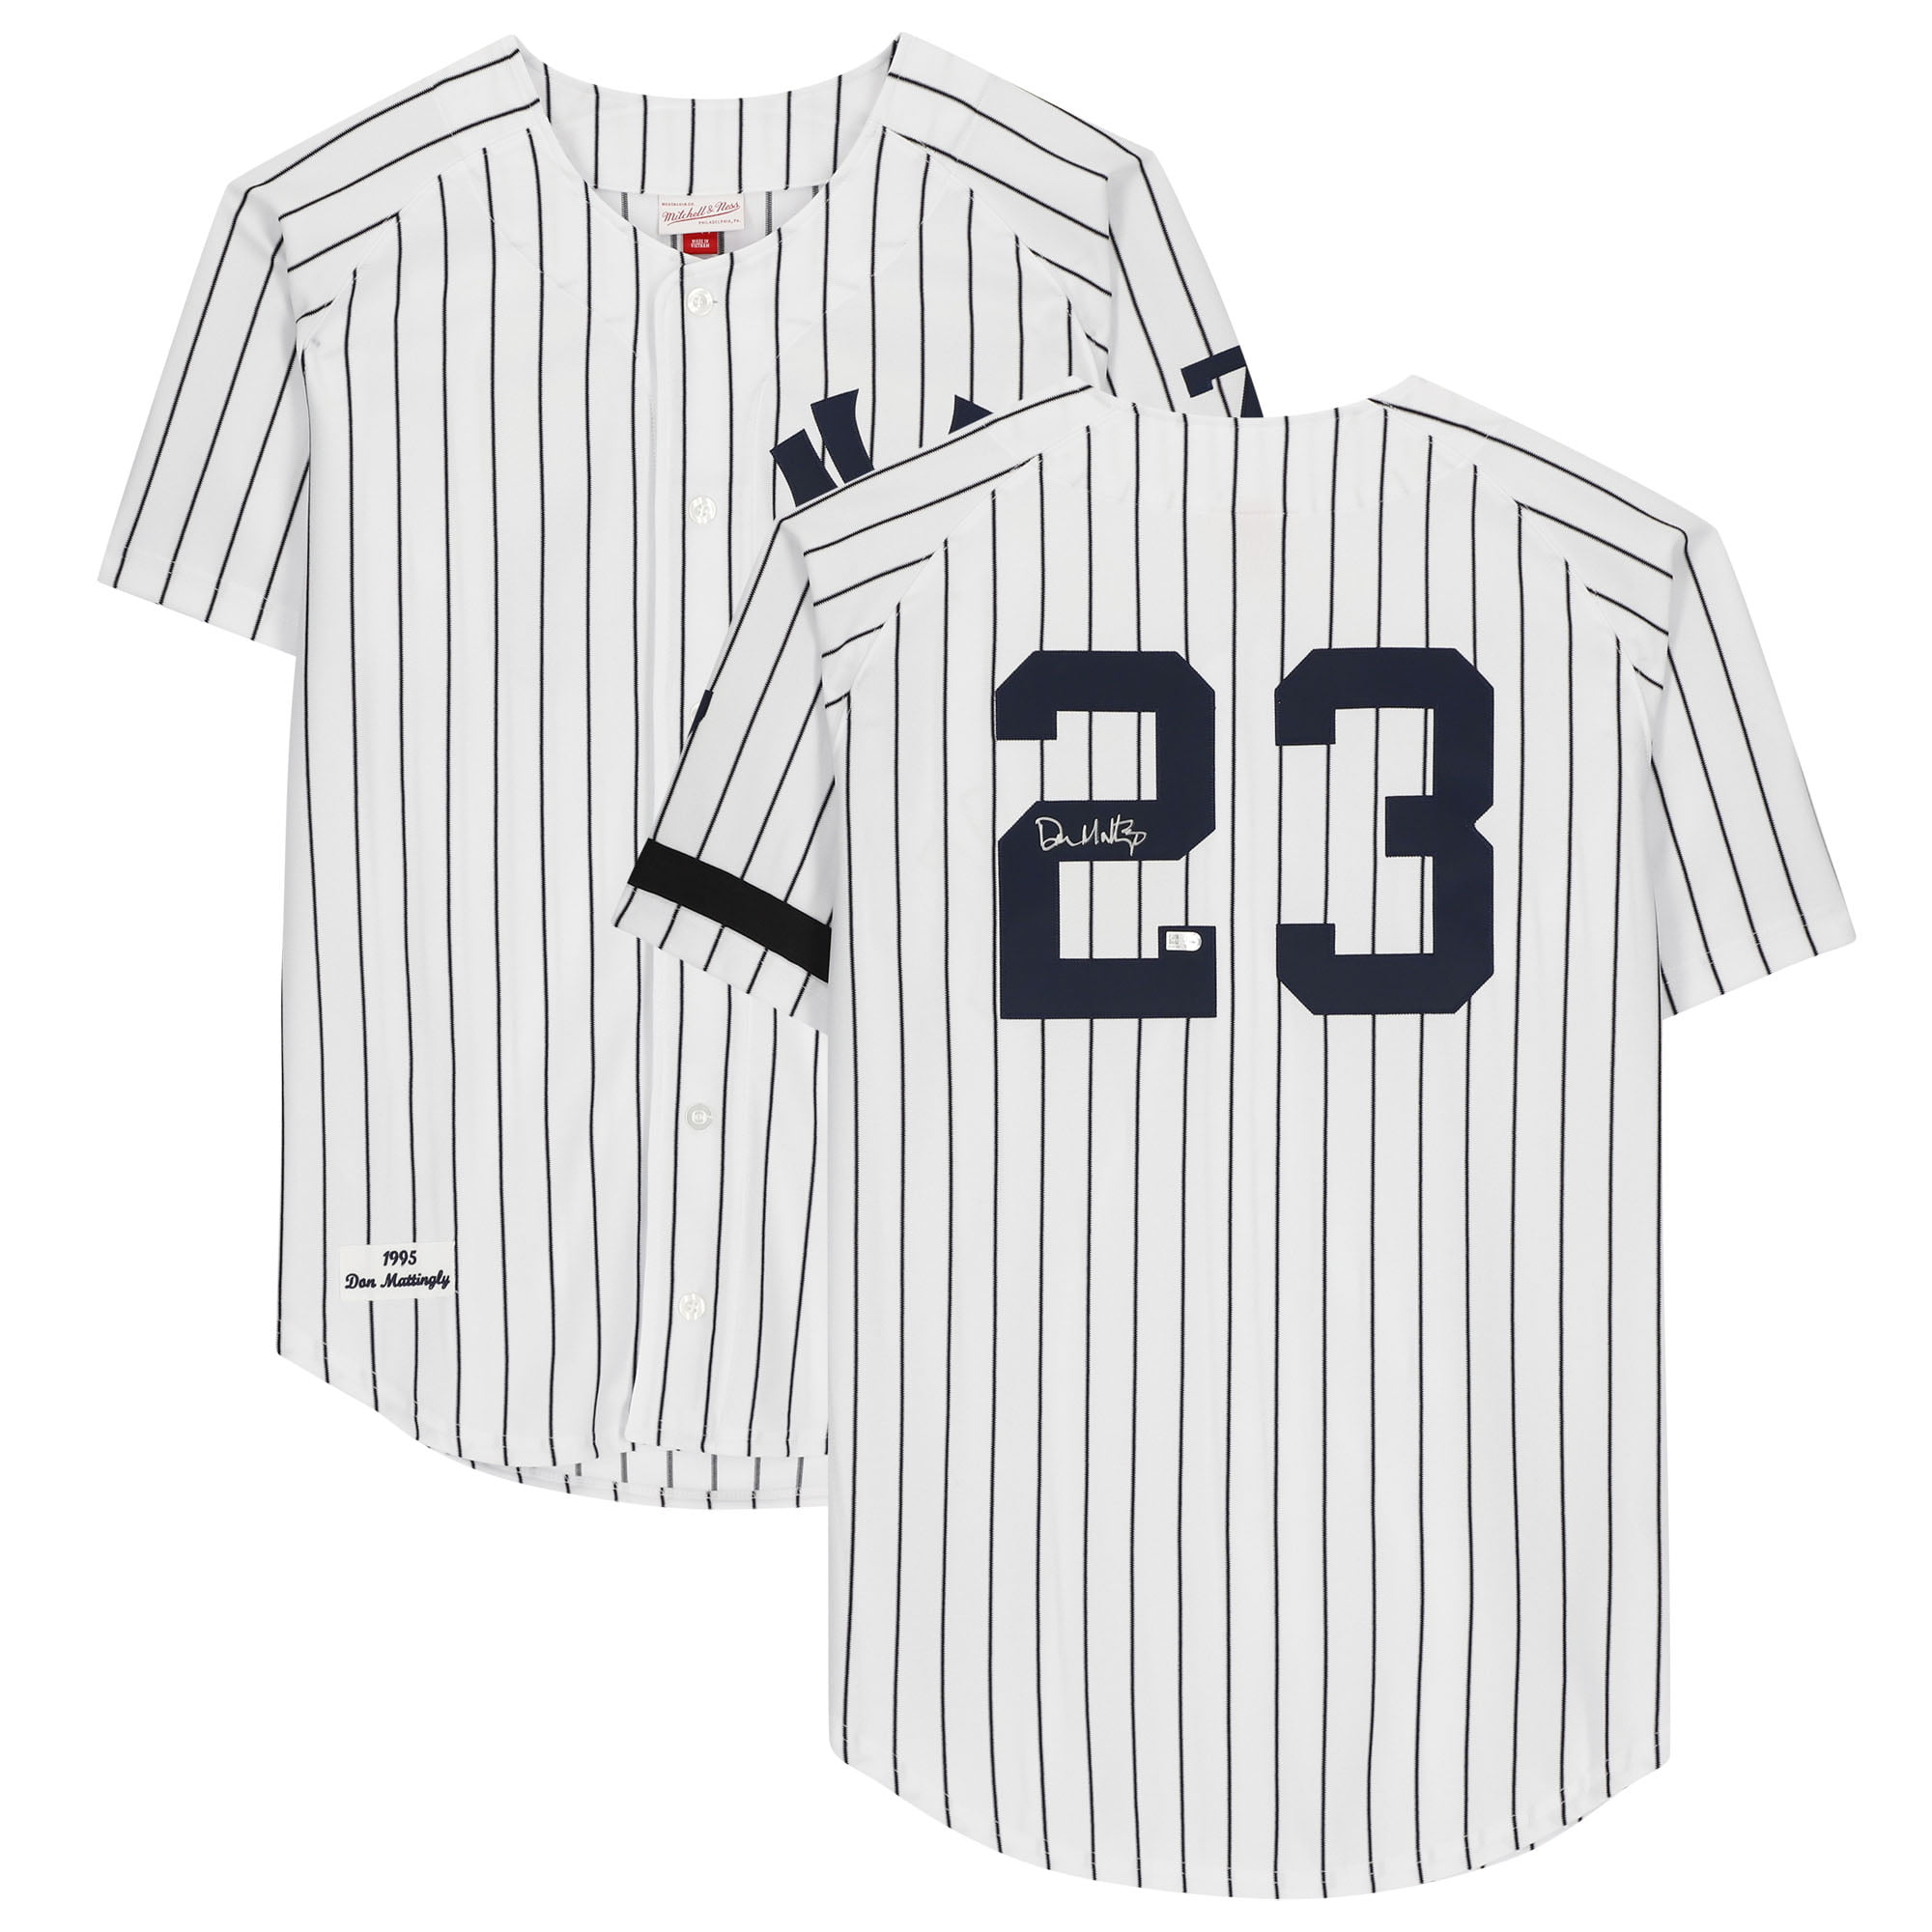 Don Mattingly Signed New York Yankees Jersey Cooperstown